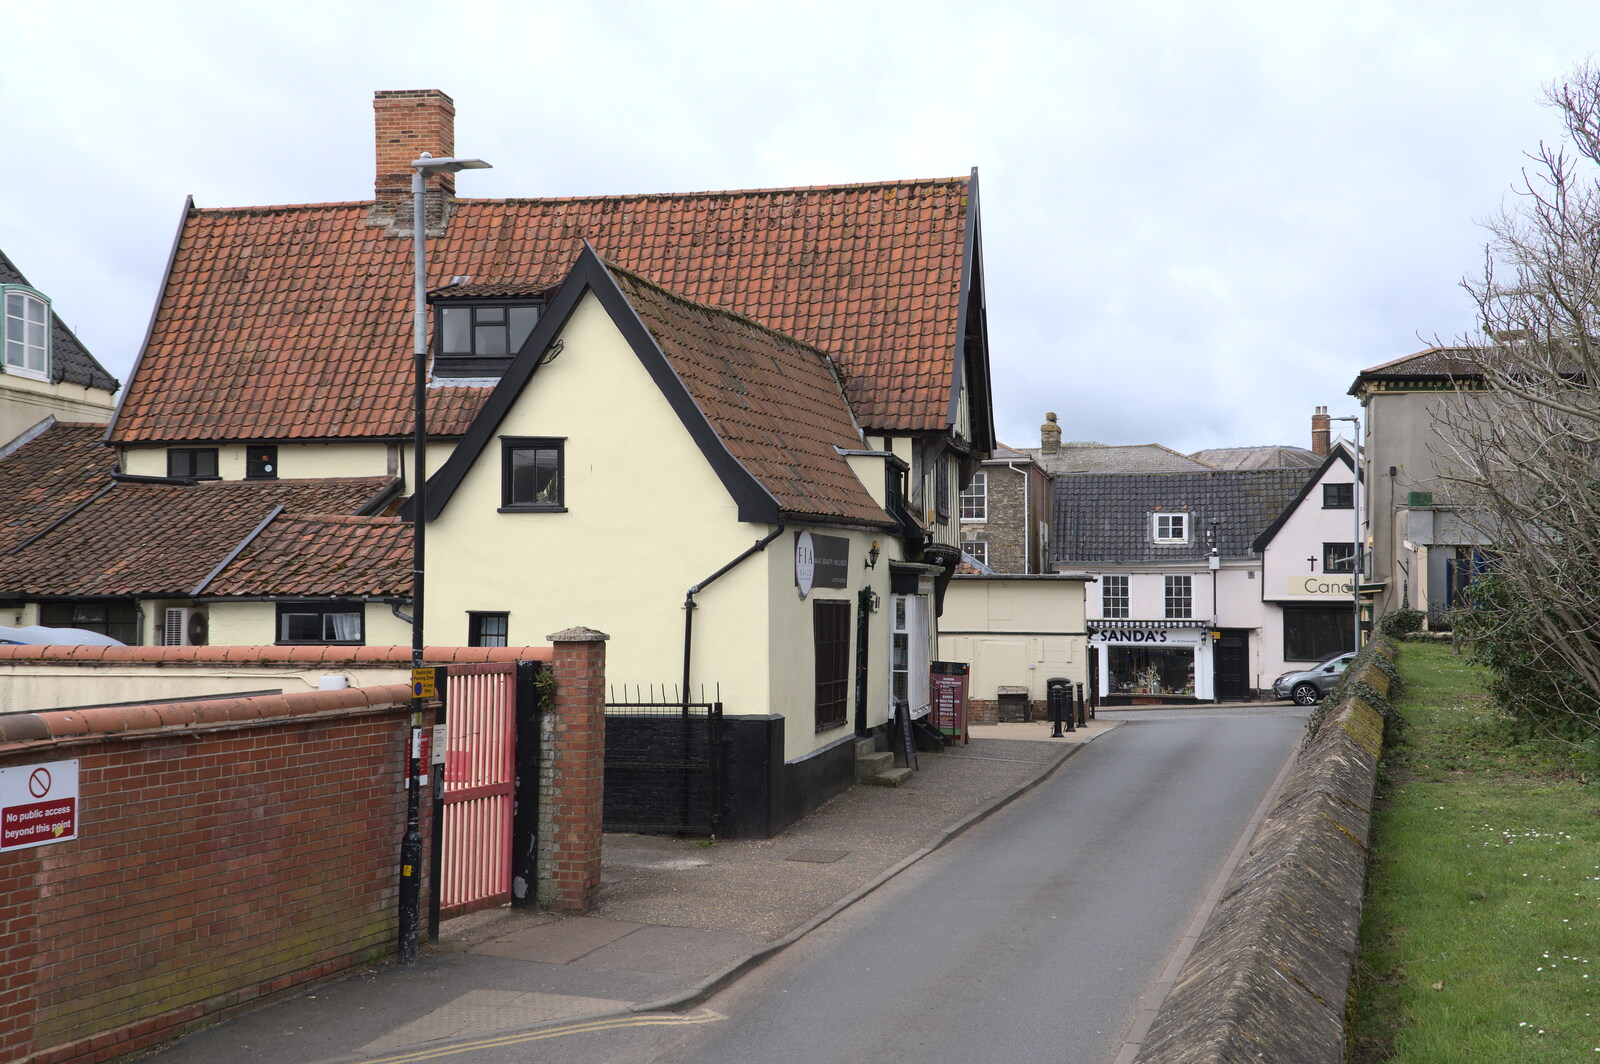 A Trip Down South, New Milton, Hampshire - 9th April 2022: A view to the back of Dolphin House